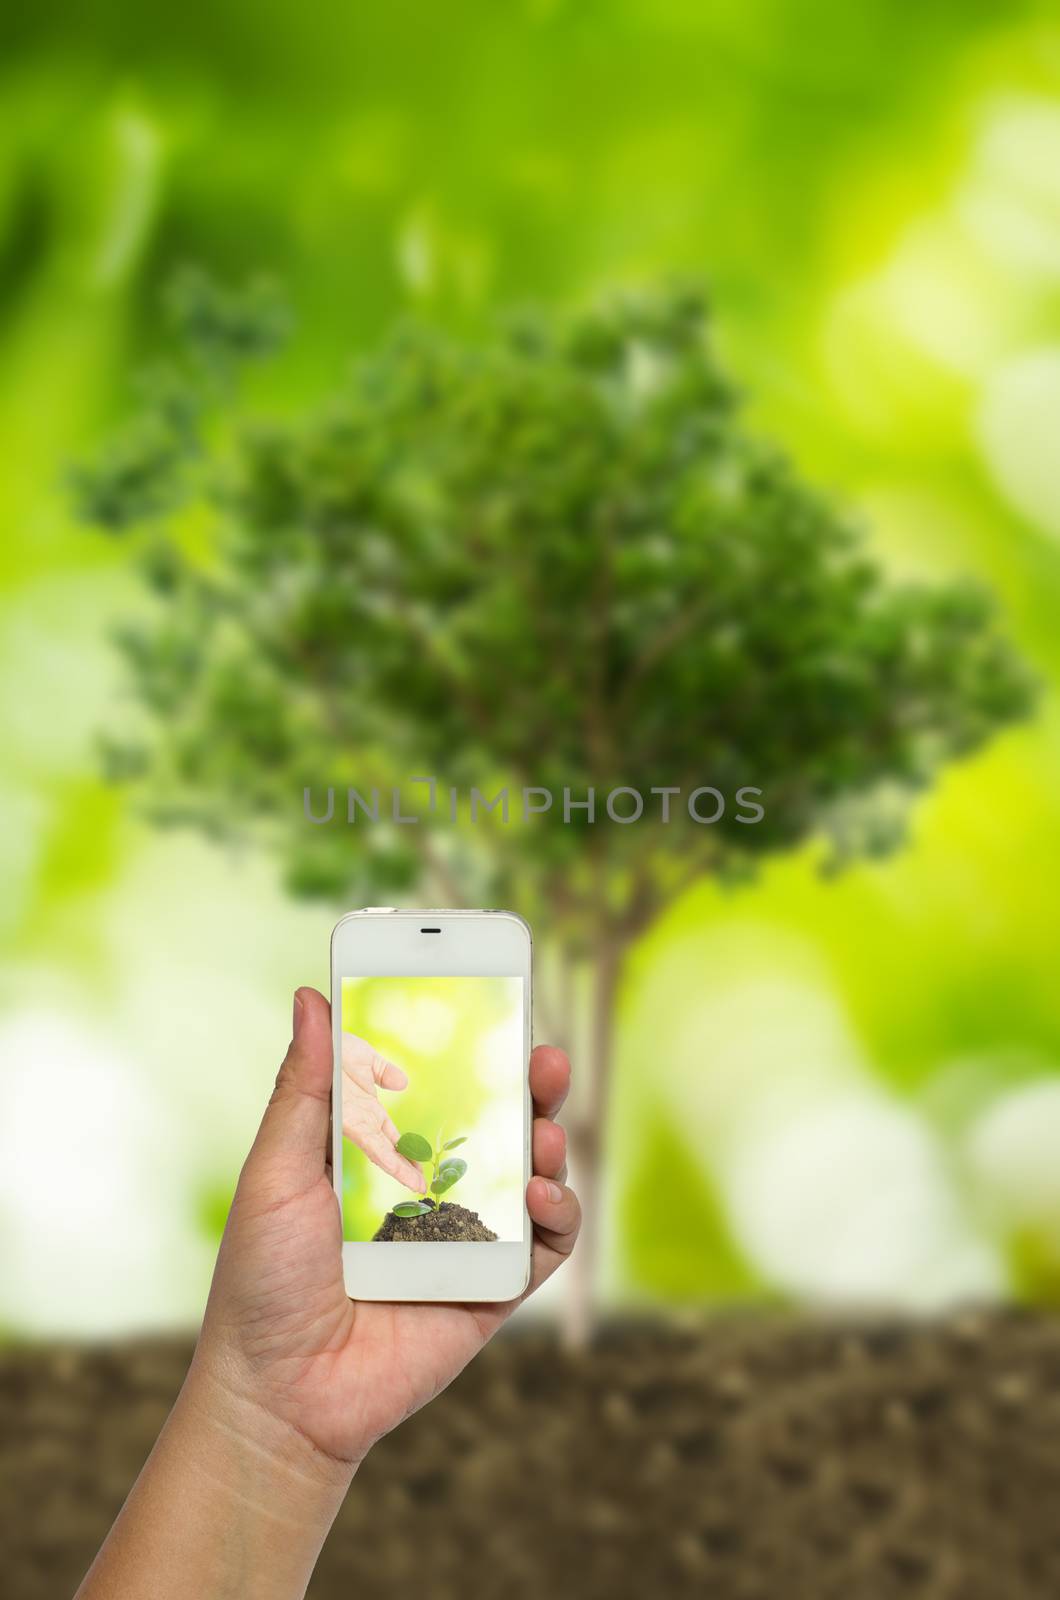 Tracking the growth of tree seedlings from one of a large tree. Business concept that can expand from a small business into a large company. by photobyphotoboy